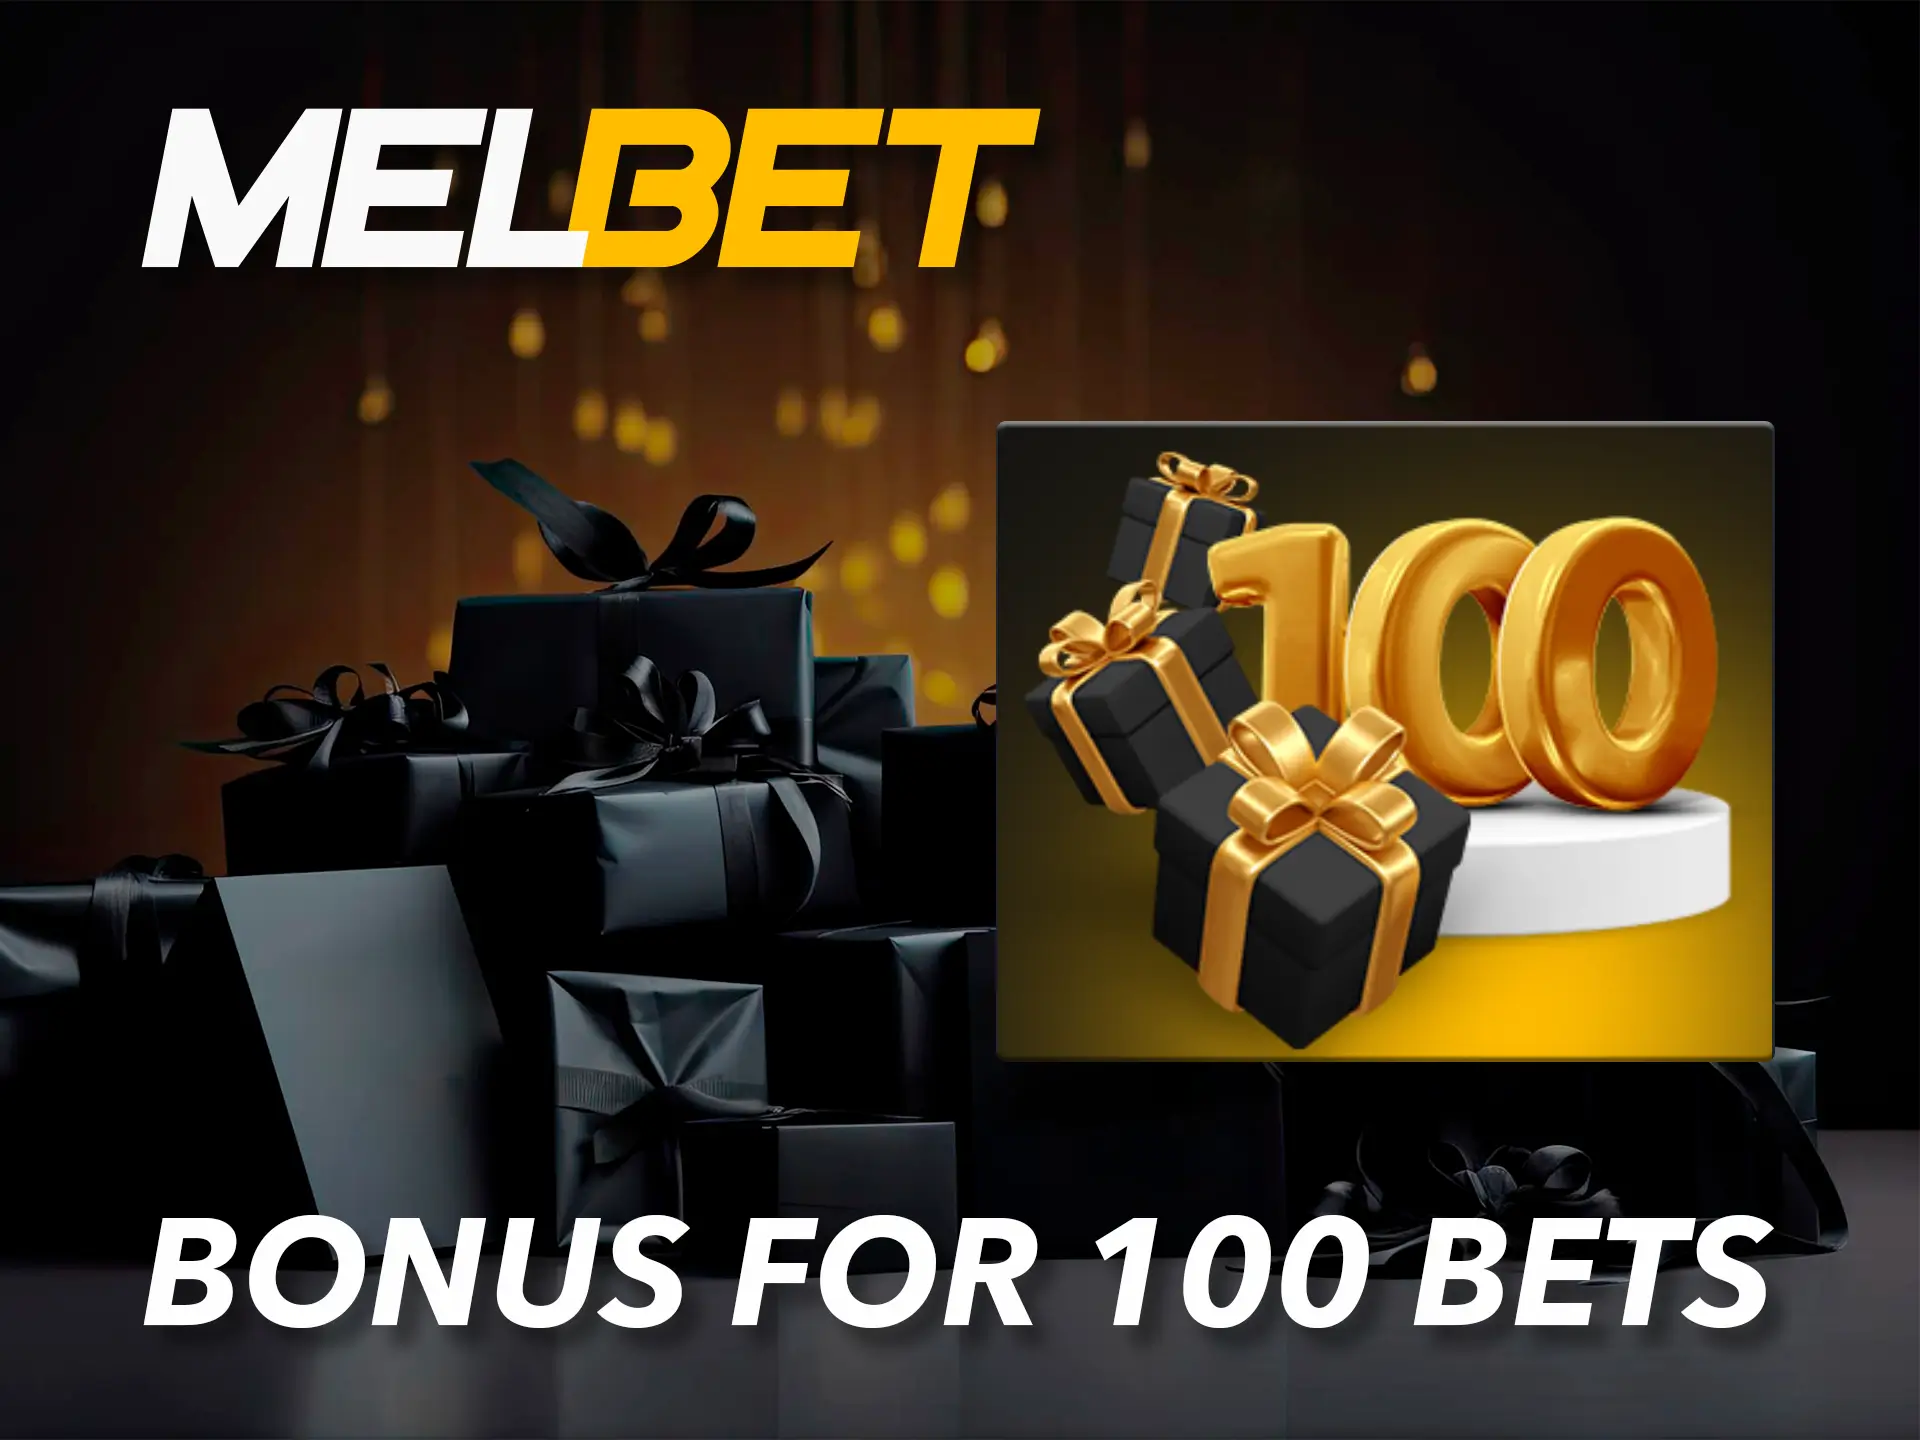 Get a swanky bonus from Melbet for sports betting.